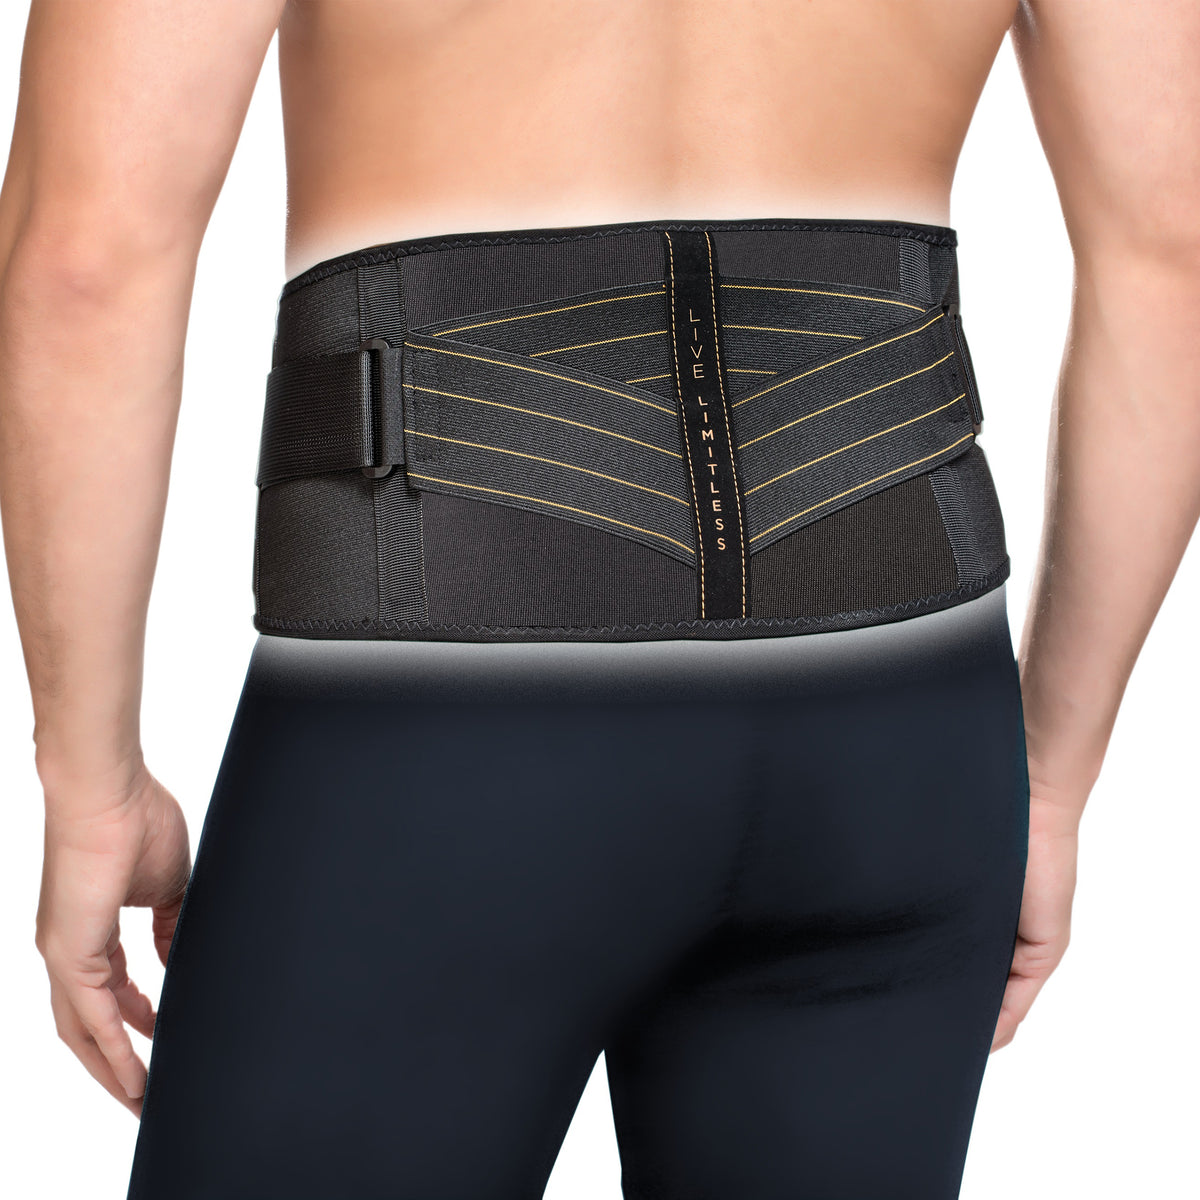 Pin on Back Pain Treatment  Braces, Belts & Supports for Lower, Middle &  Upper Back Pain Relief